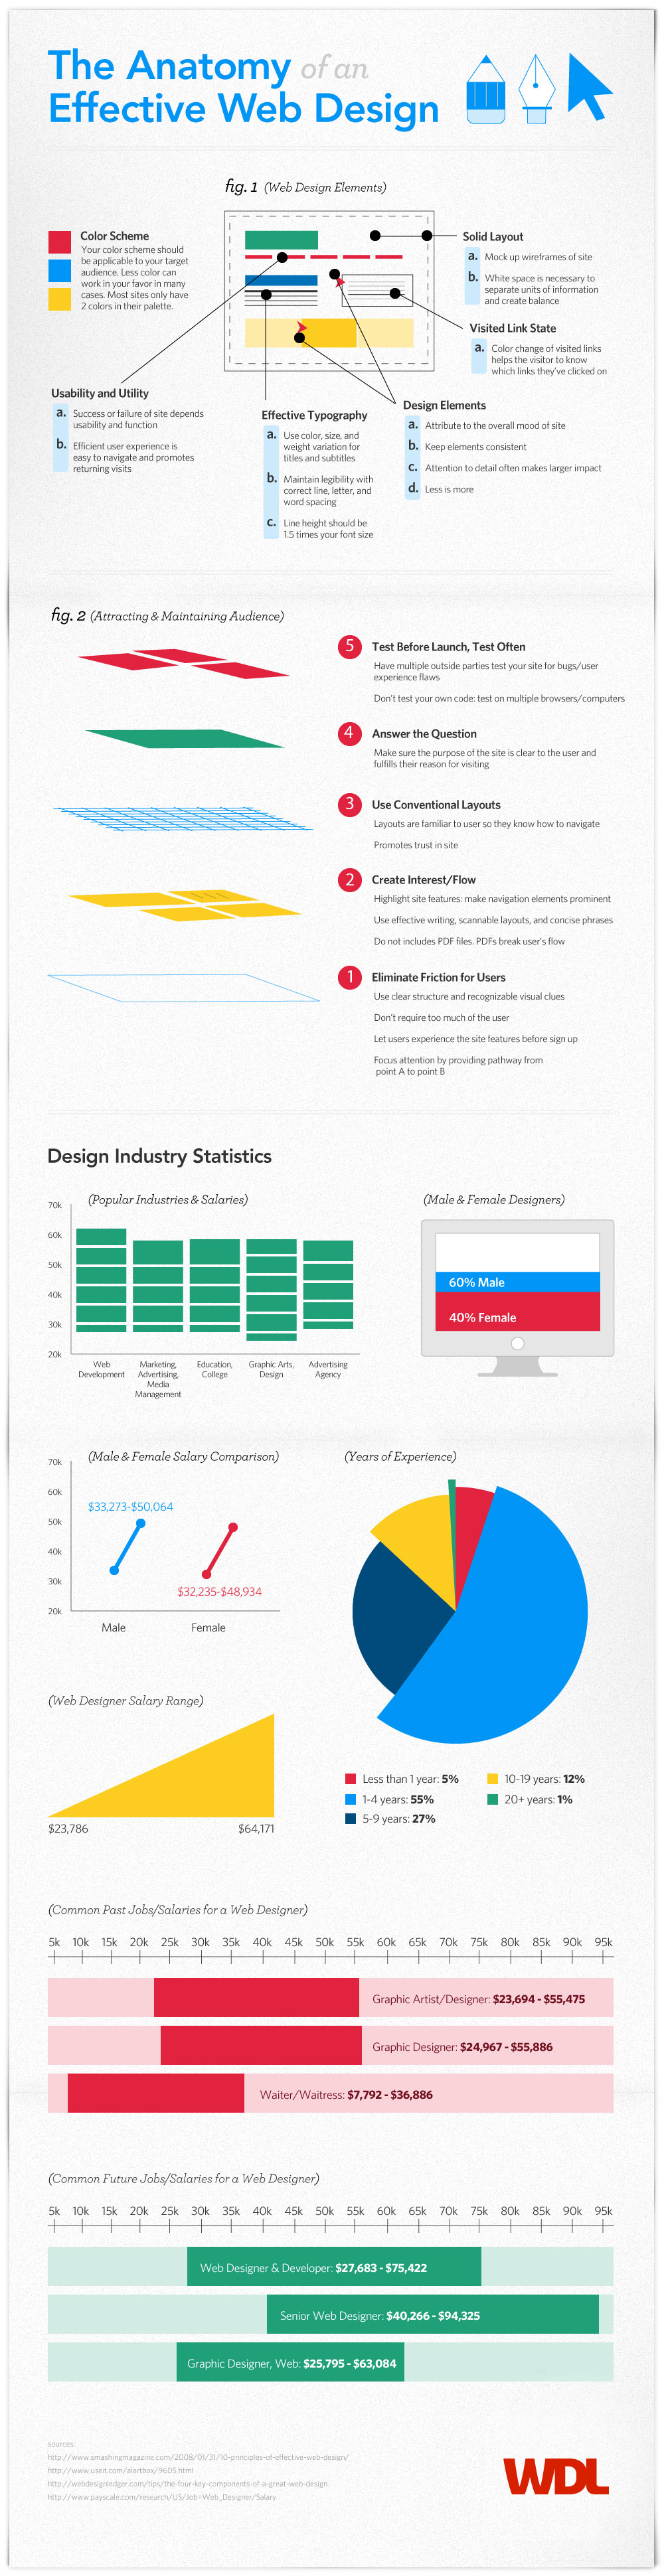 The Anatomy Of An Effective Web Design [Infographic]